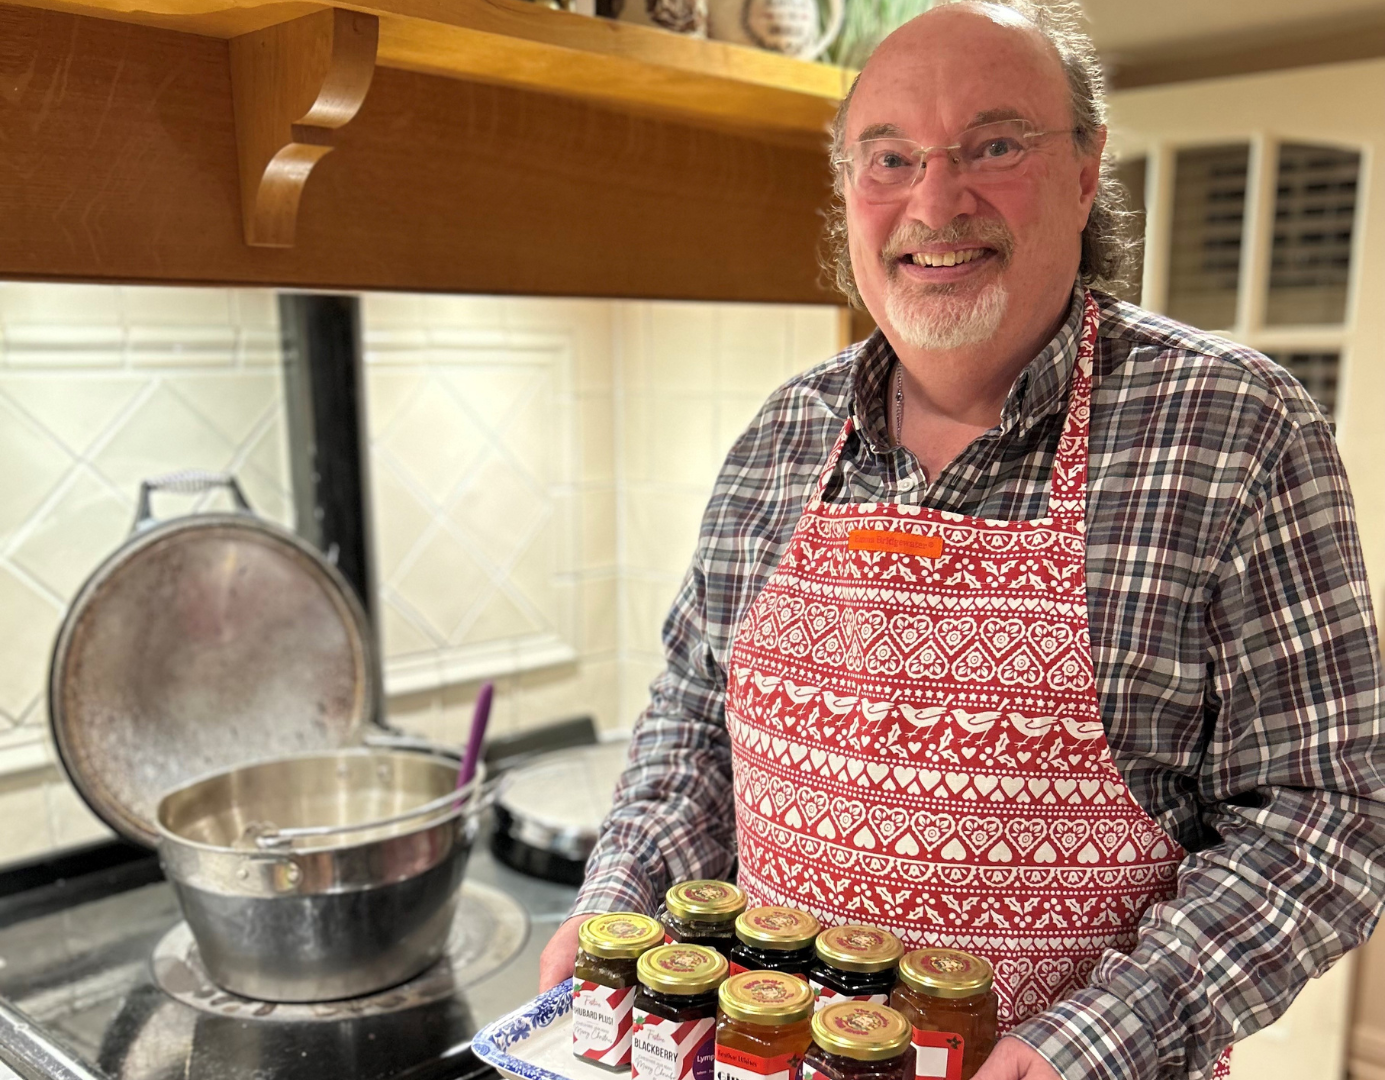 Alister holding home made jams and preserves